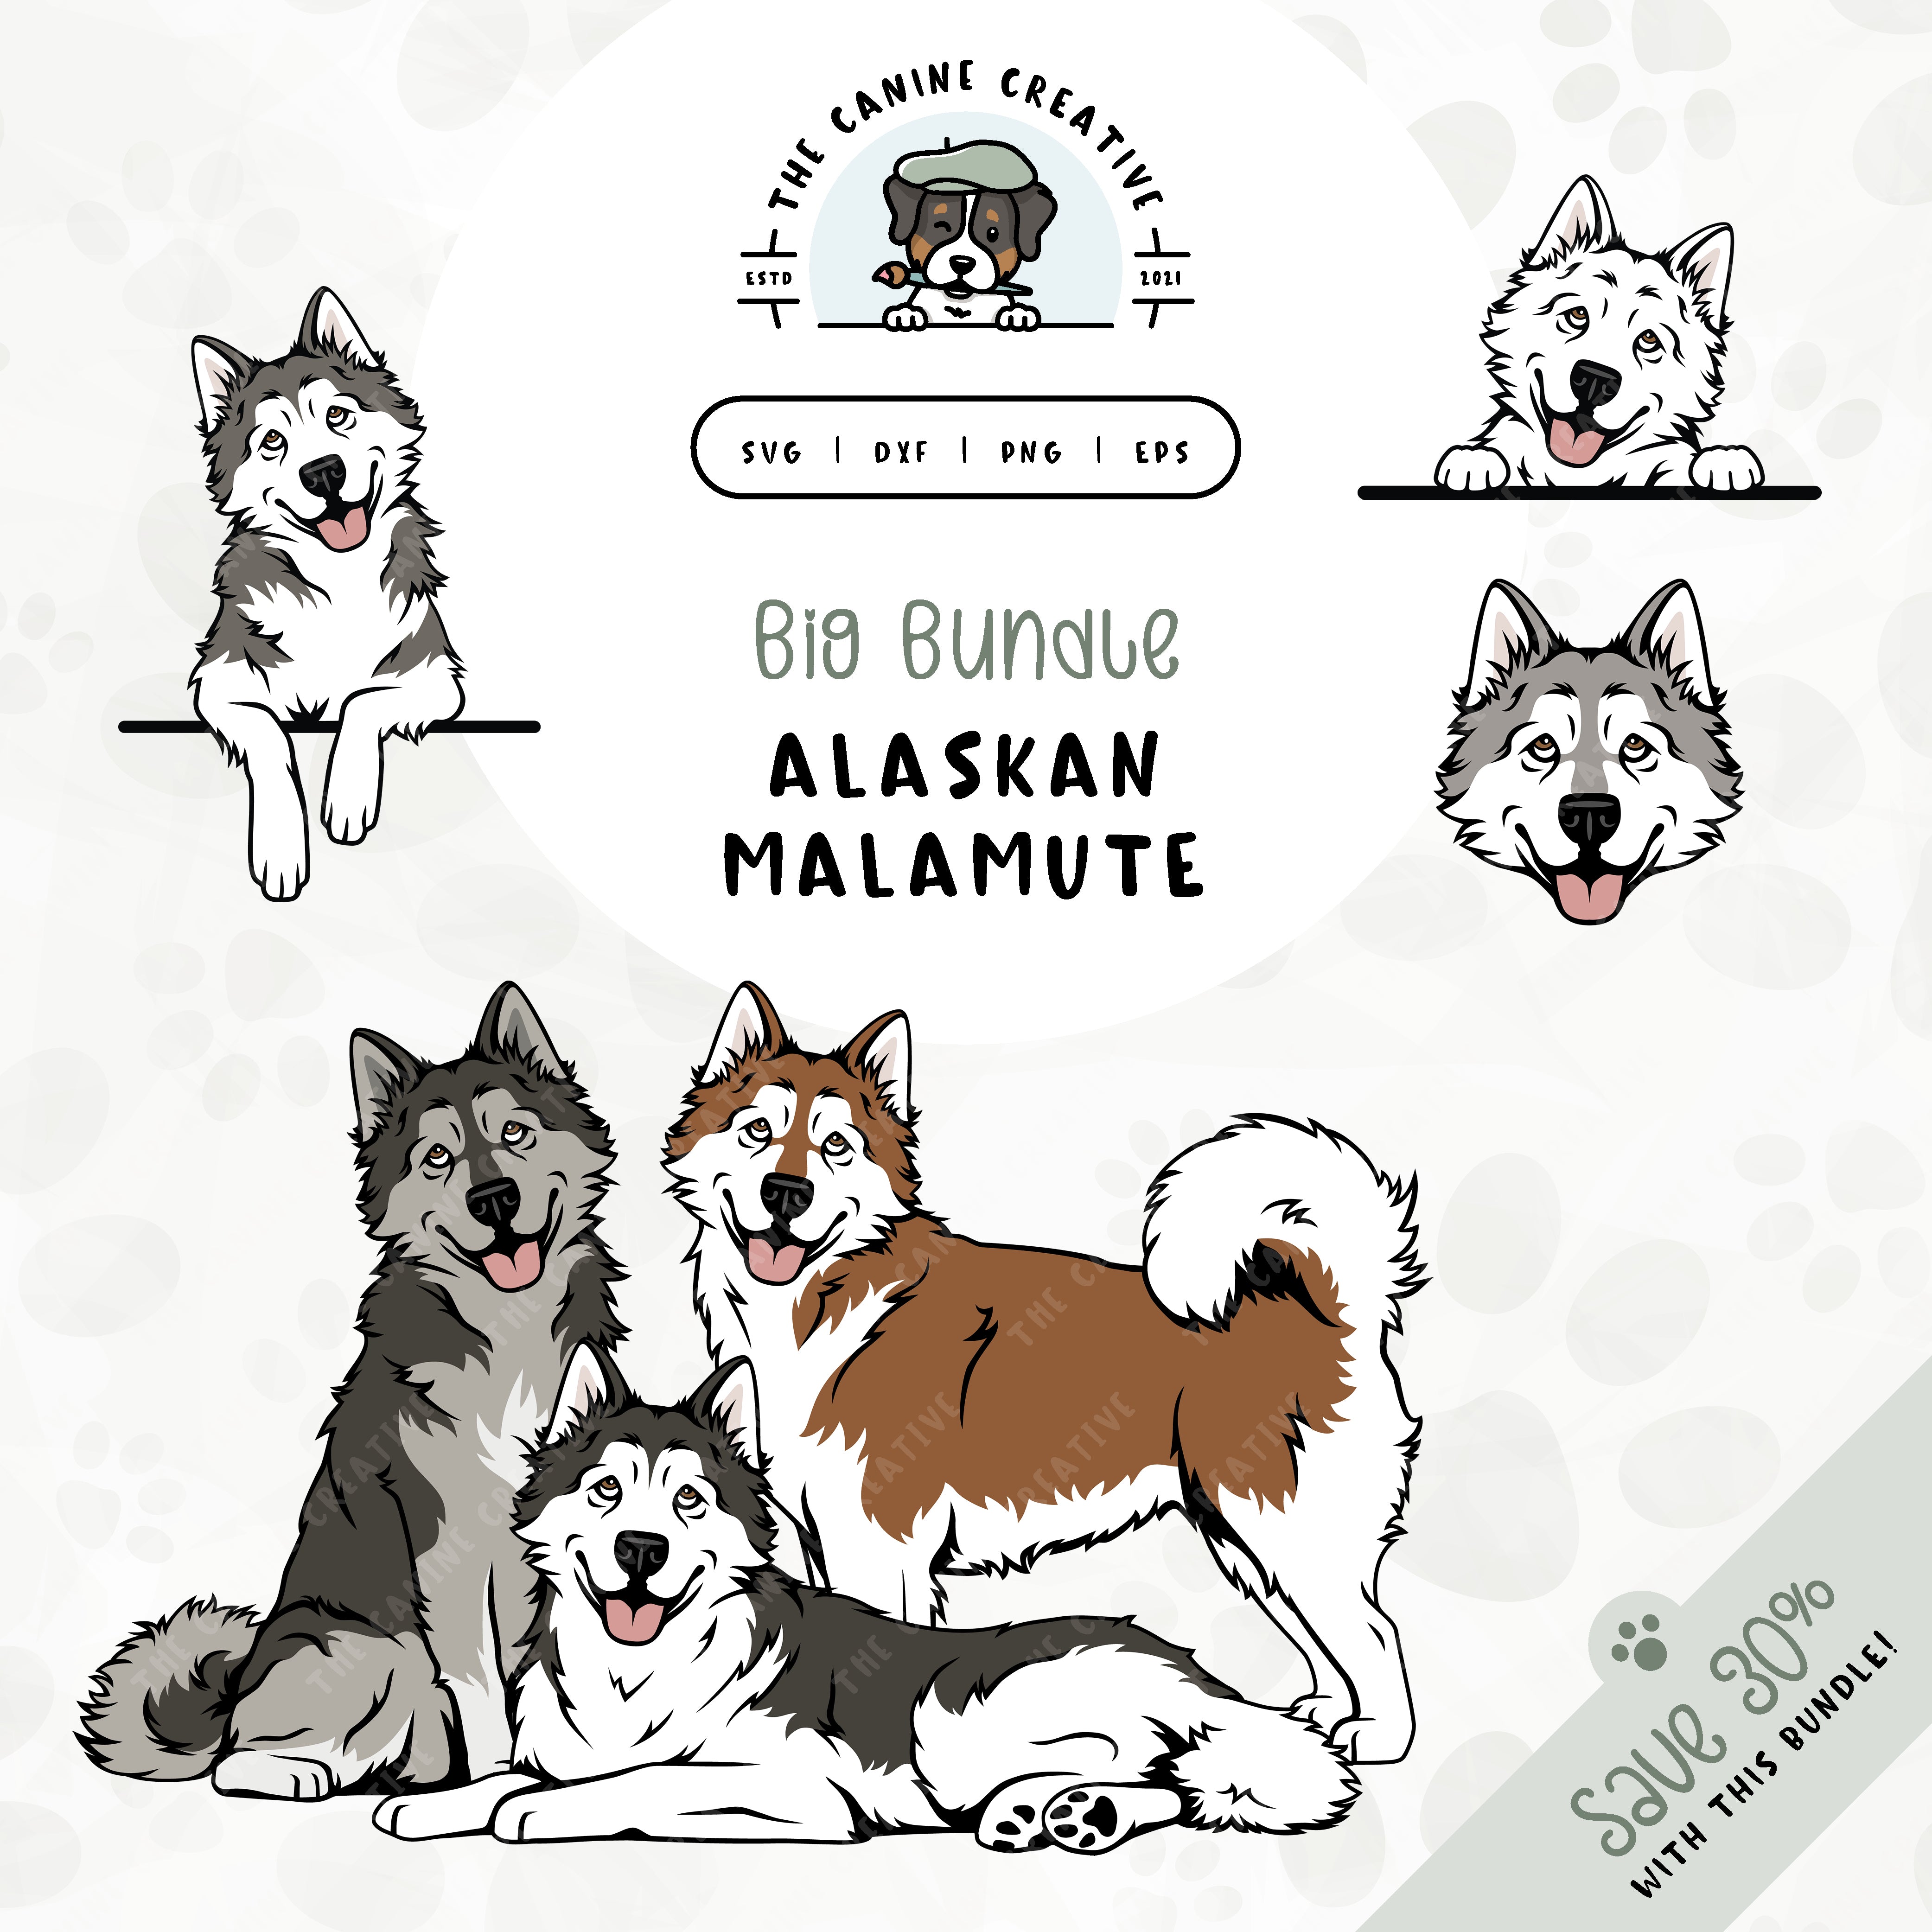 This 6-pack Alaskan Malamute design bundle includes Mally faces and five different poses: sitting, standing, laying down, and peeking (2 options). File formats include: SVG, DXF, PNG, and EPS.